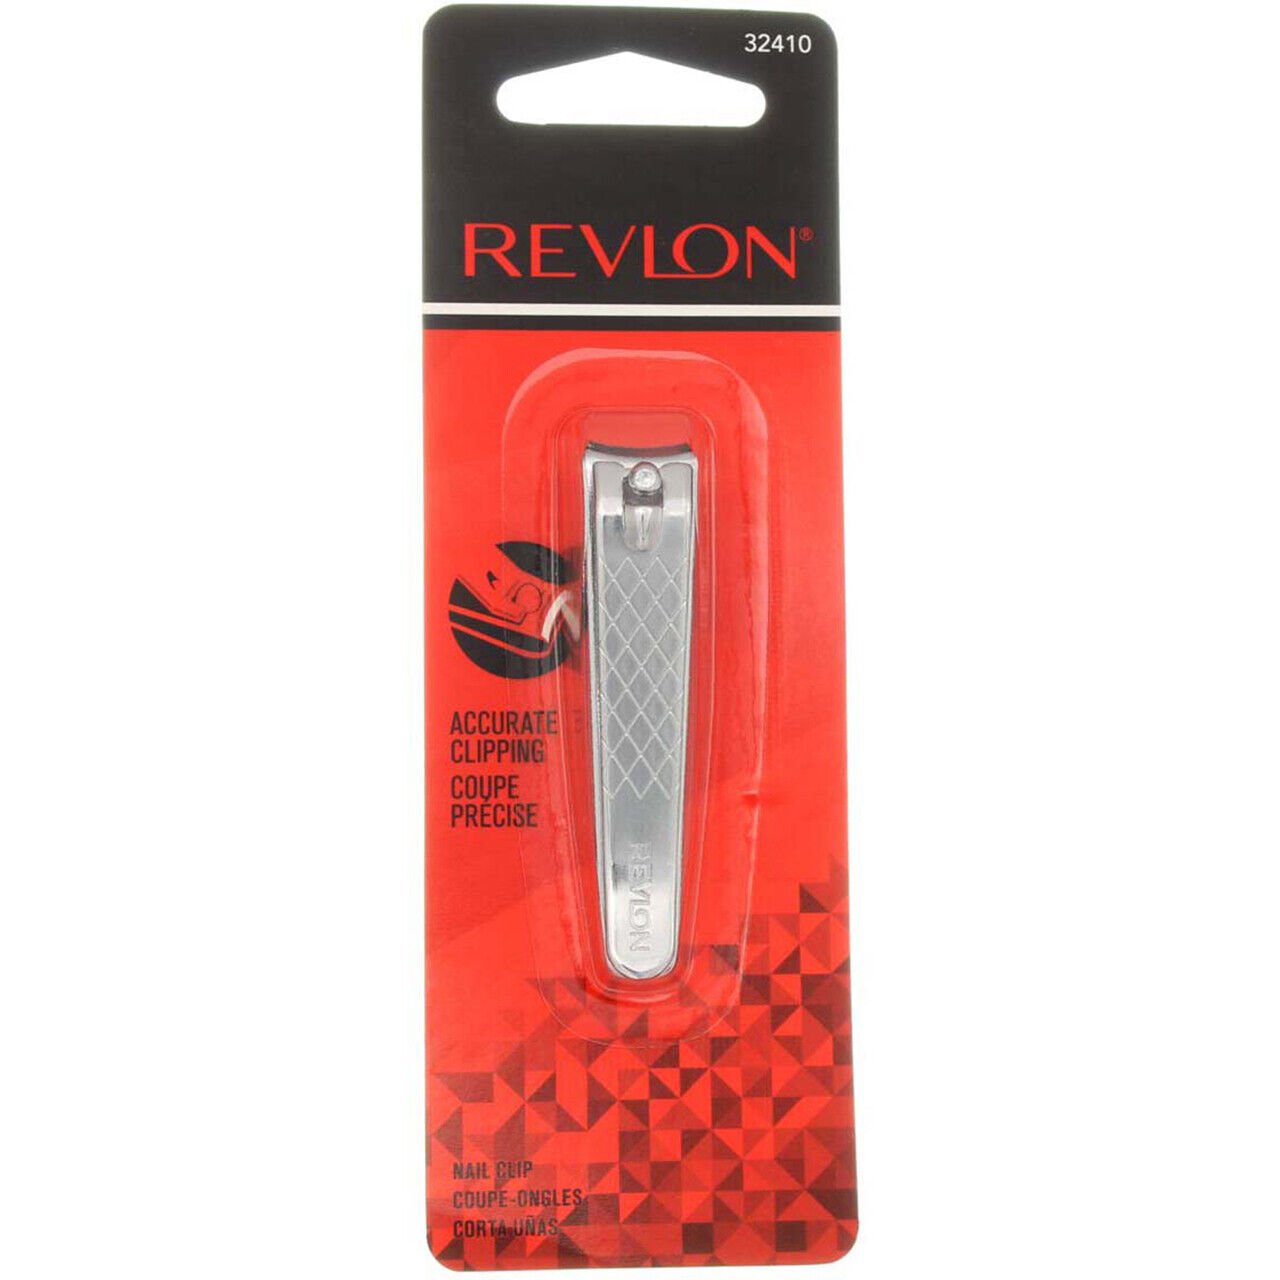 Revlon Nail Clippers With Curved Edge and Foldaway File